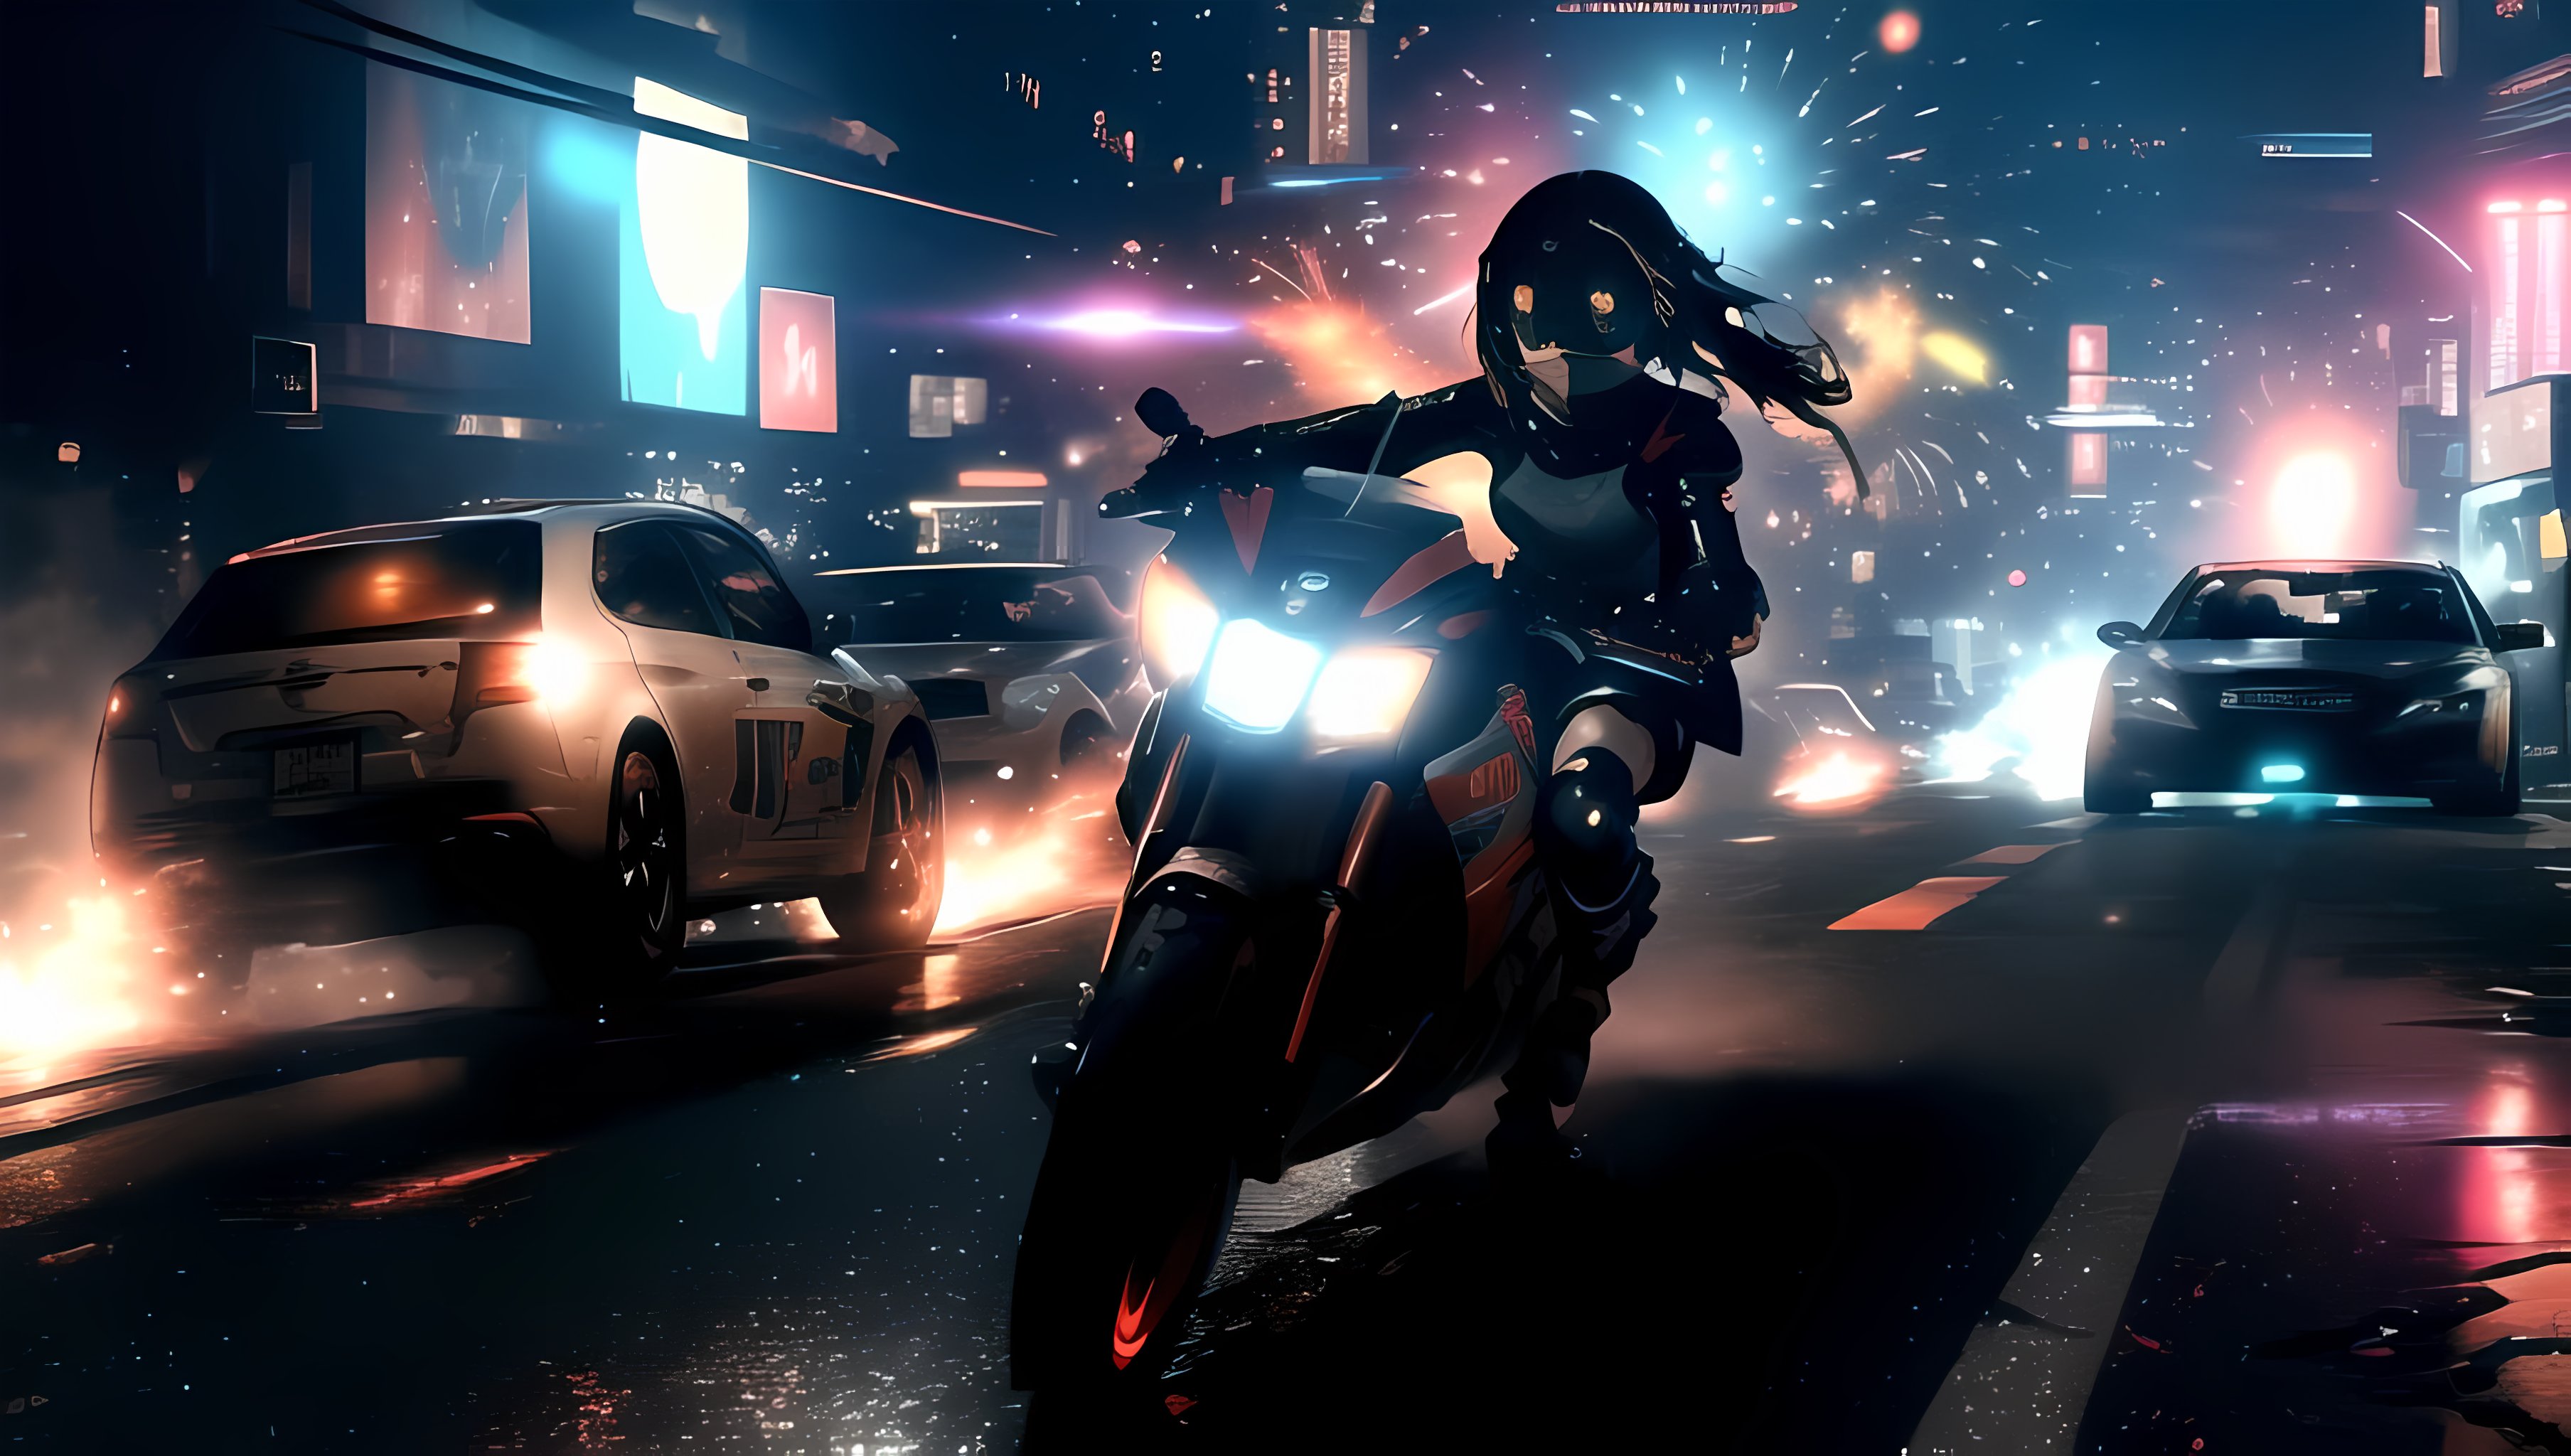 masterpiece, hi-res, ultra detailed, 8k, hdr, detailed face, cyberpunk, car, chase, motorcycles, girl on motorcycle, shots...